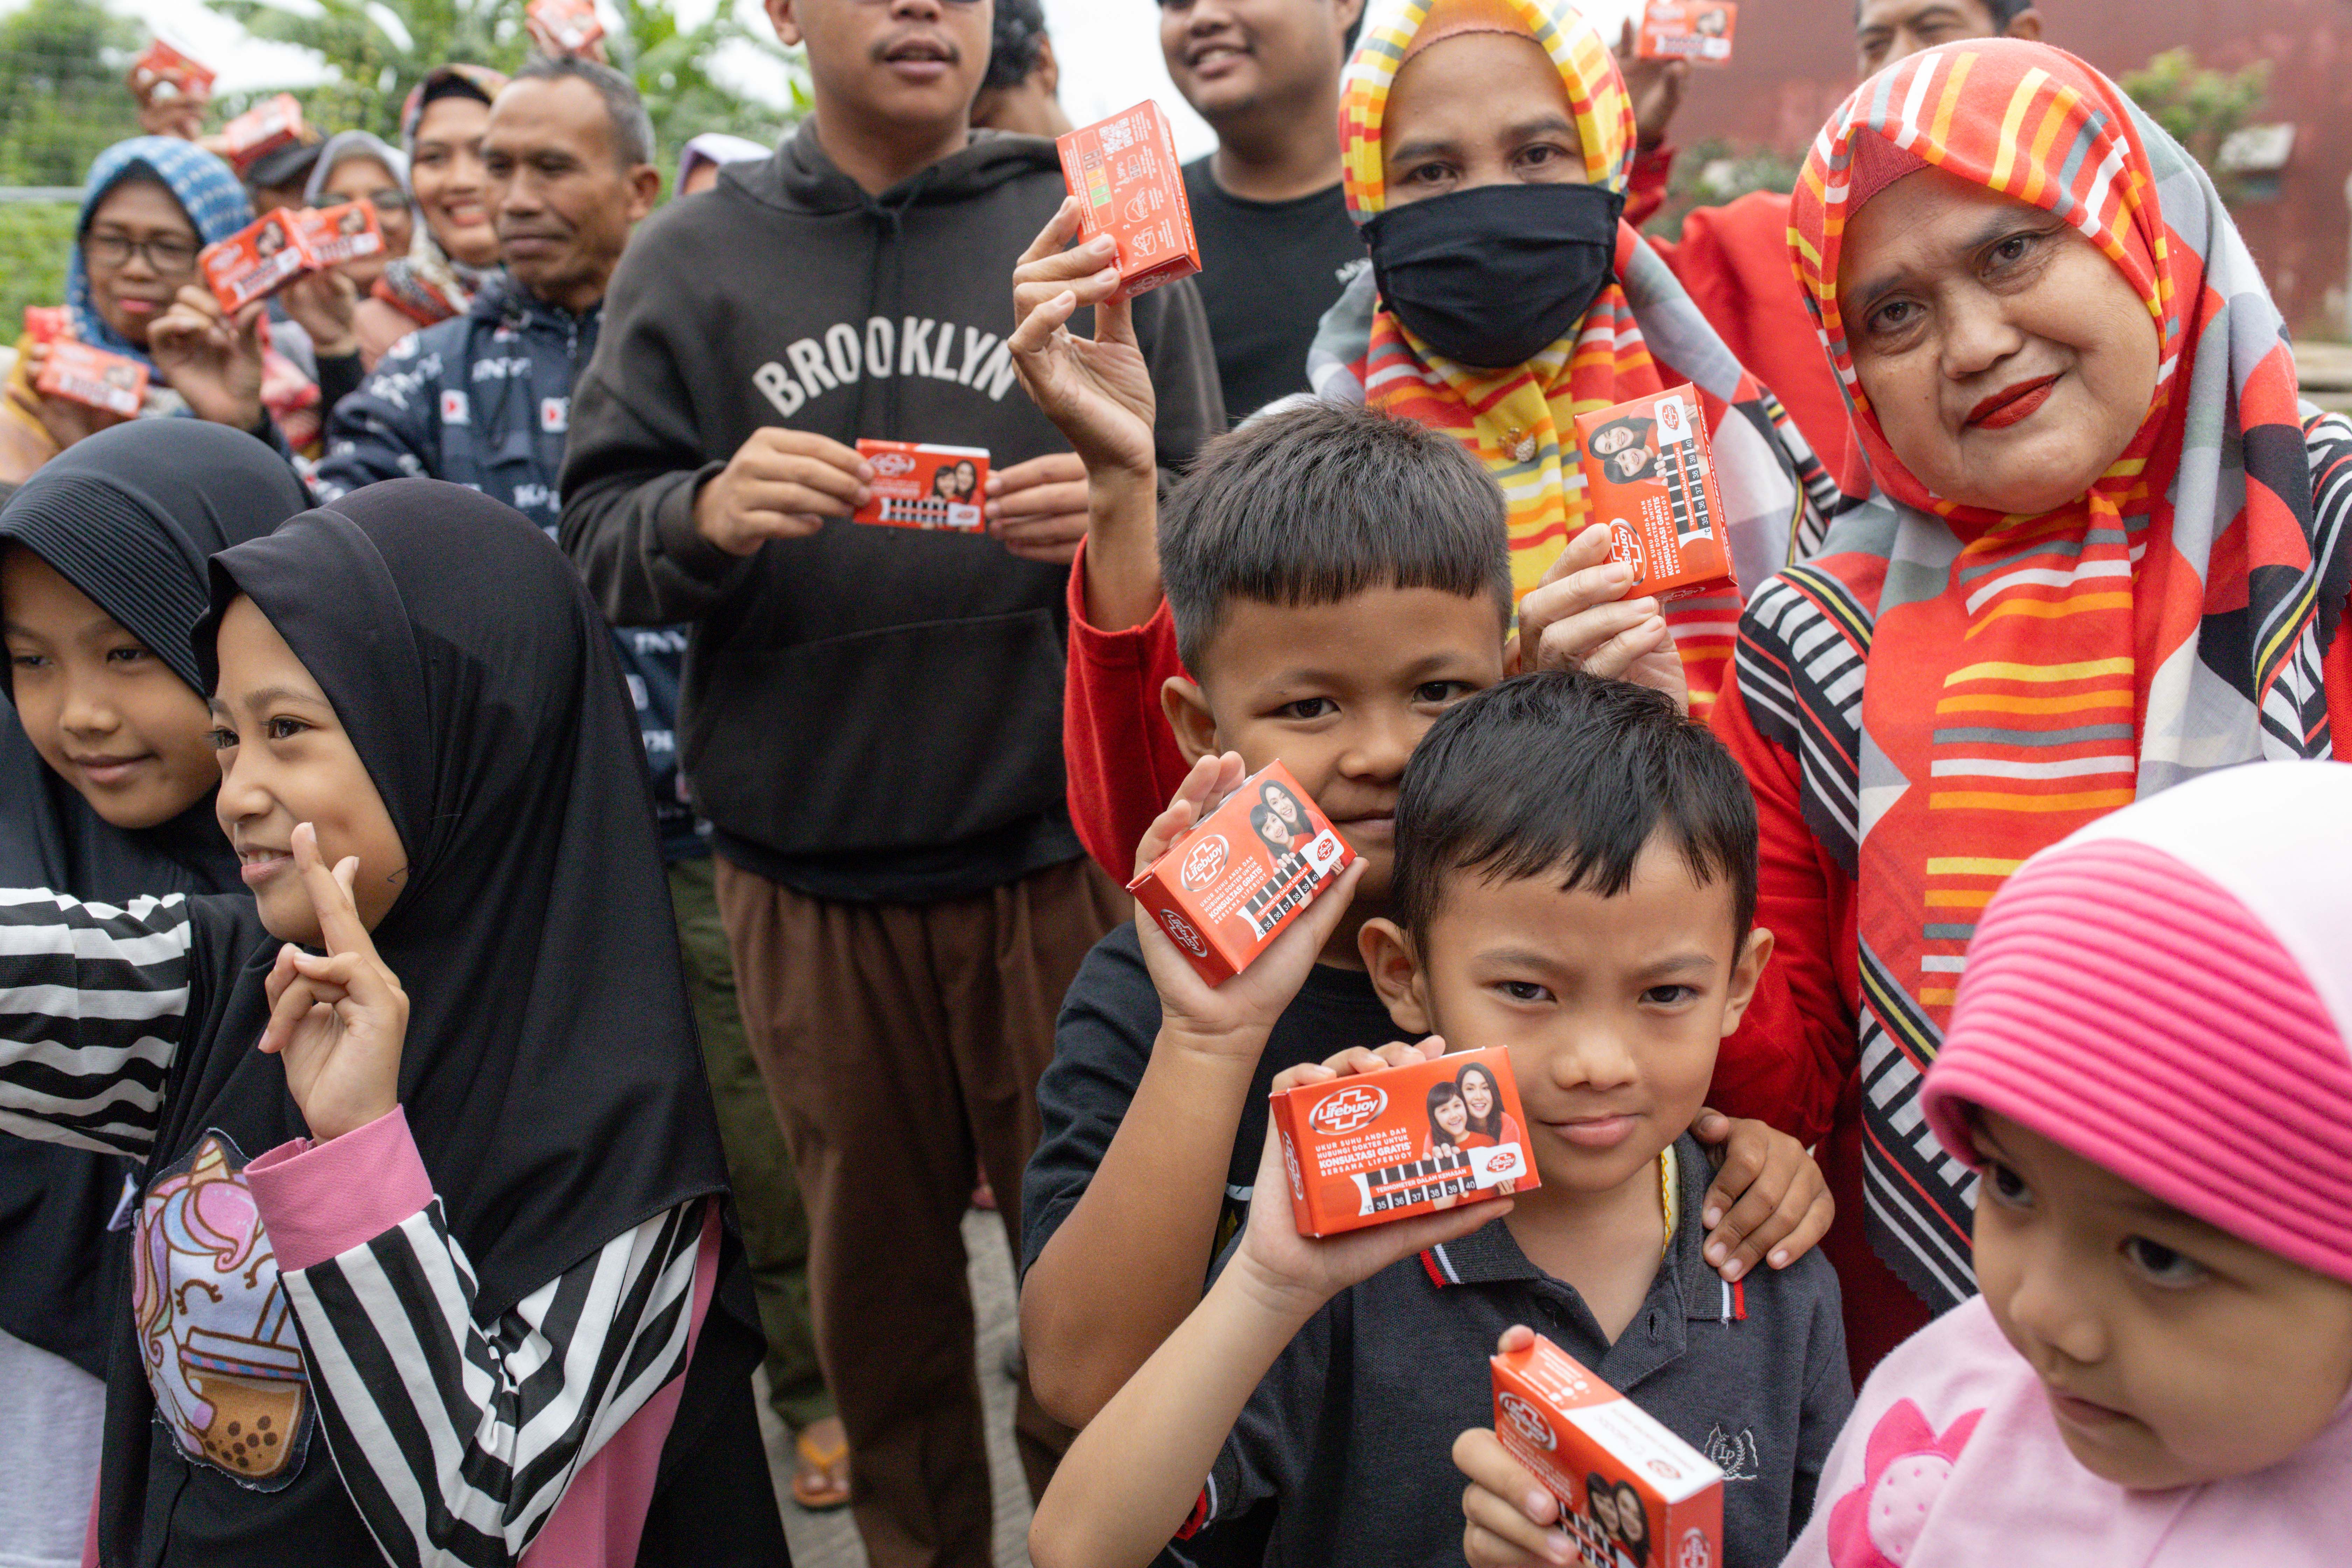 More than 2,000 Lifebuoy Sentuhan Sehat soap packs have been distributed to families in Bandung, Indonesia